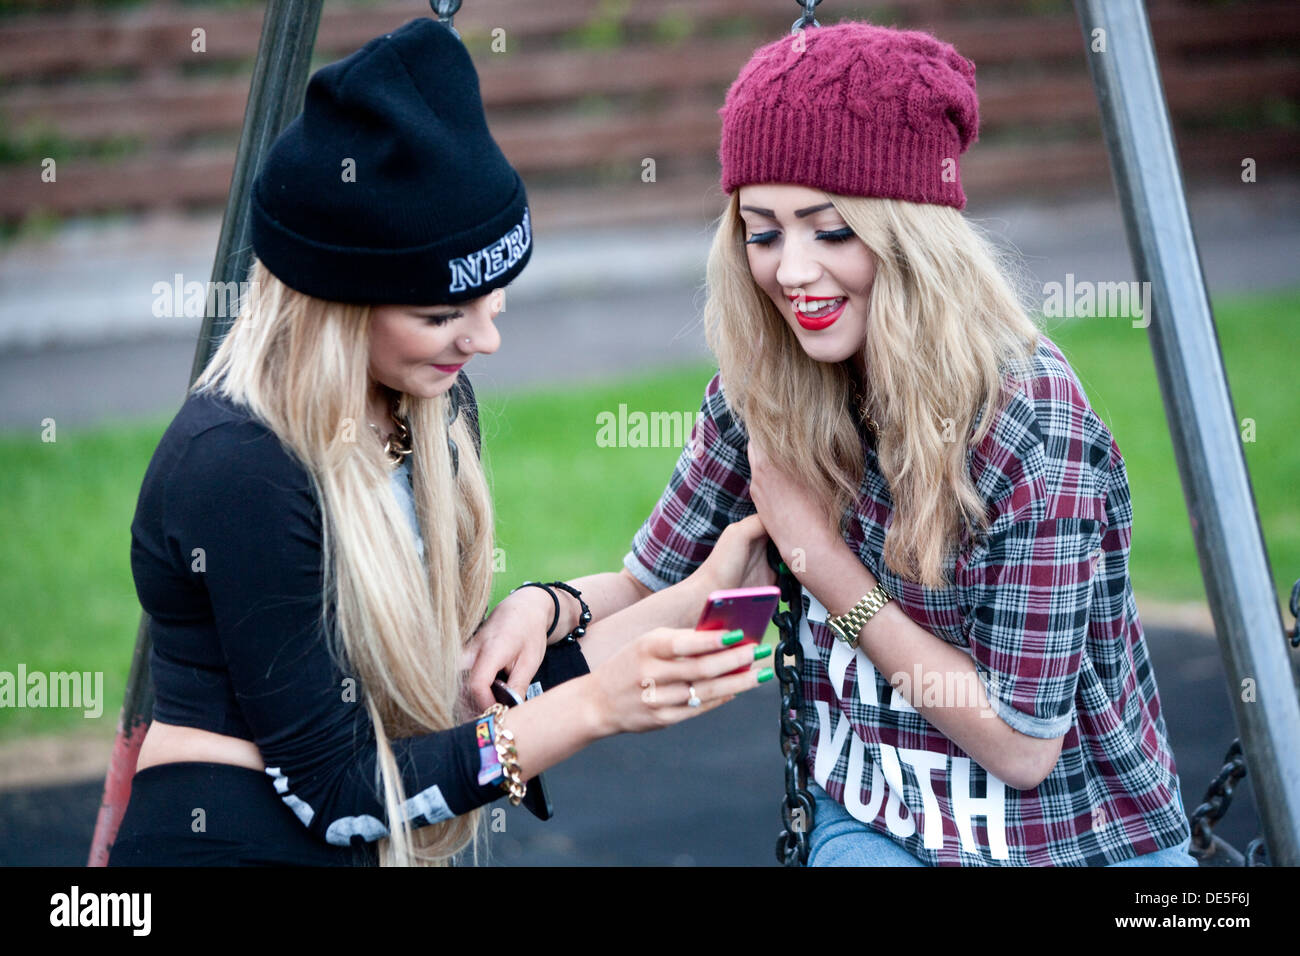 Two teenage girls outside looking at their mobile phone. Stock Photo